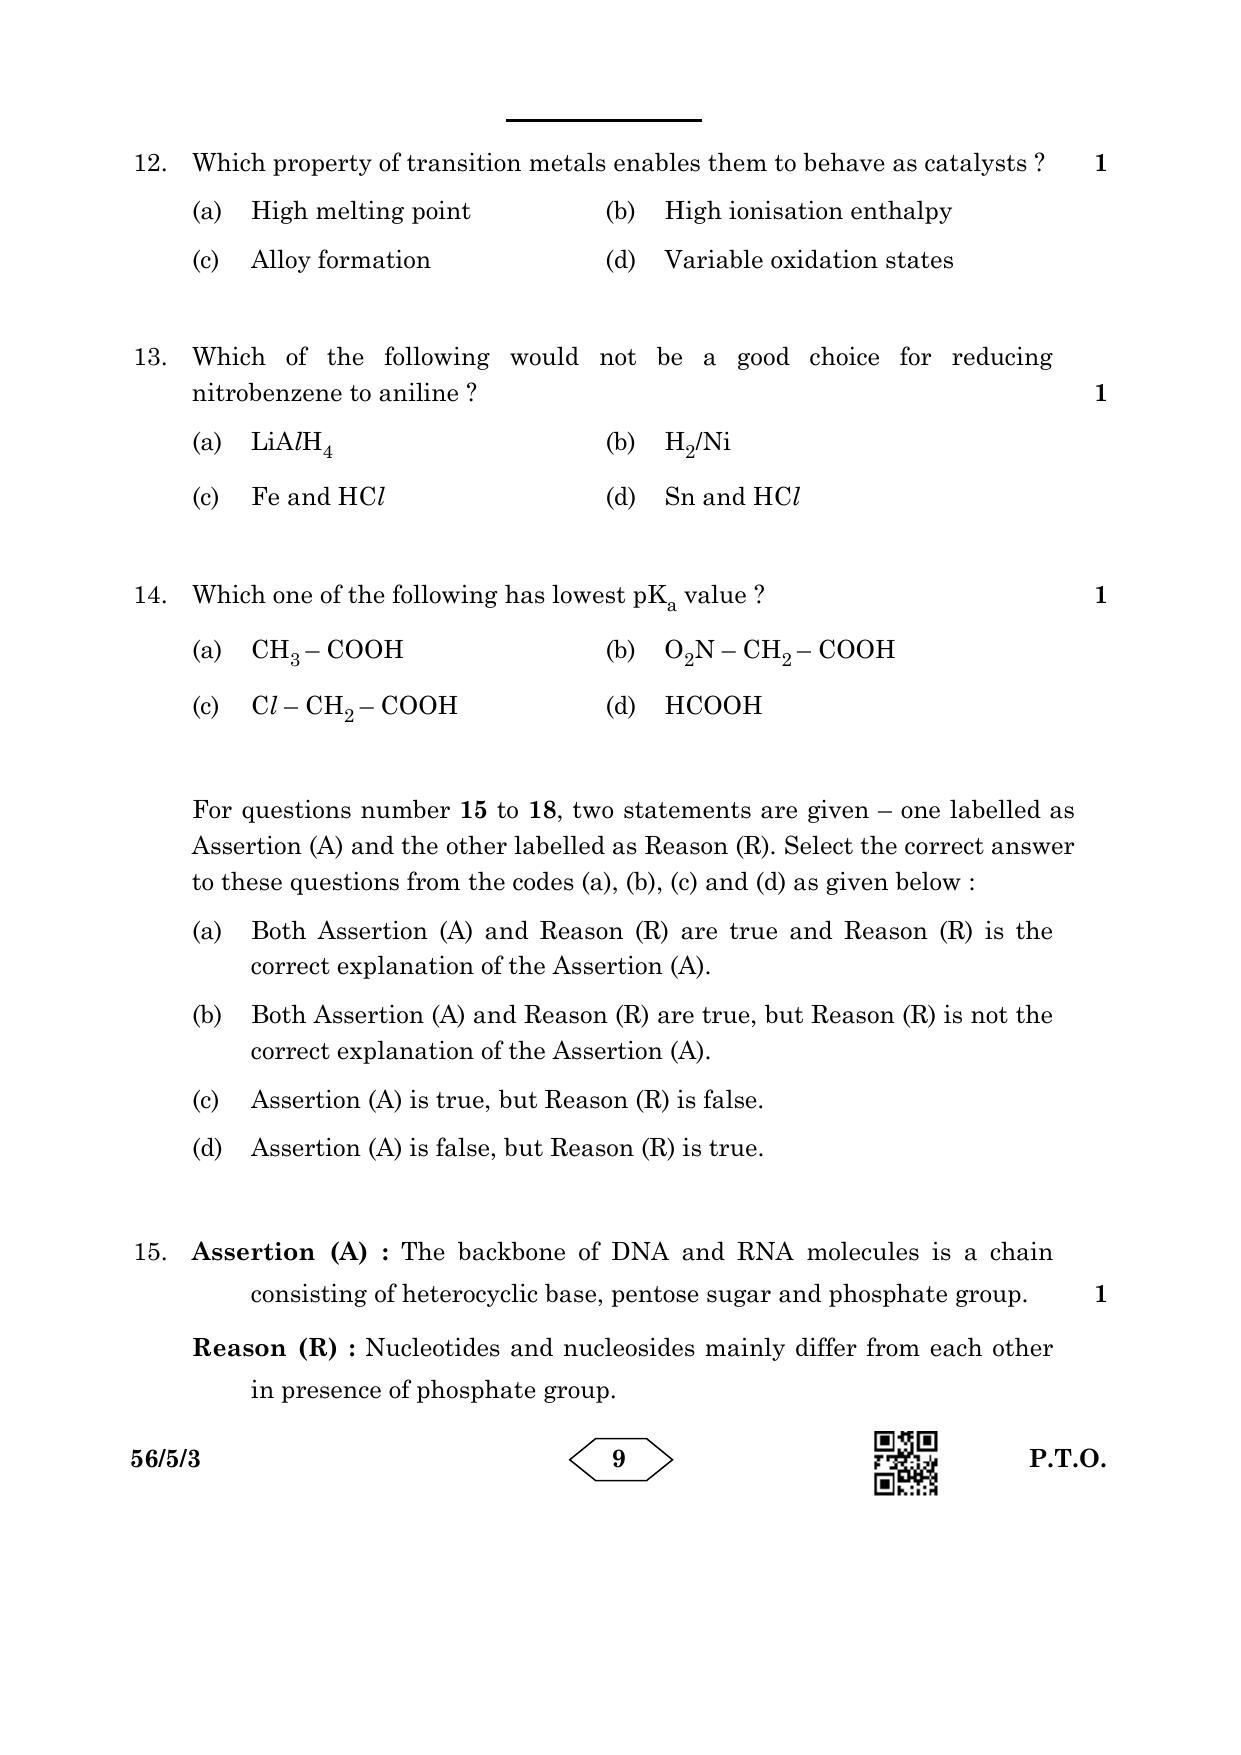 CBSE Class 12 56-5-3 Chemistry 2023 Question Paper - Page 9